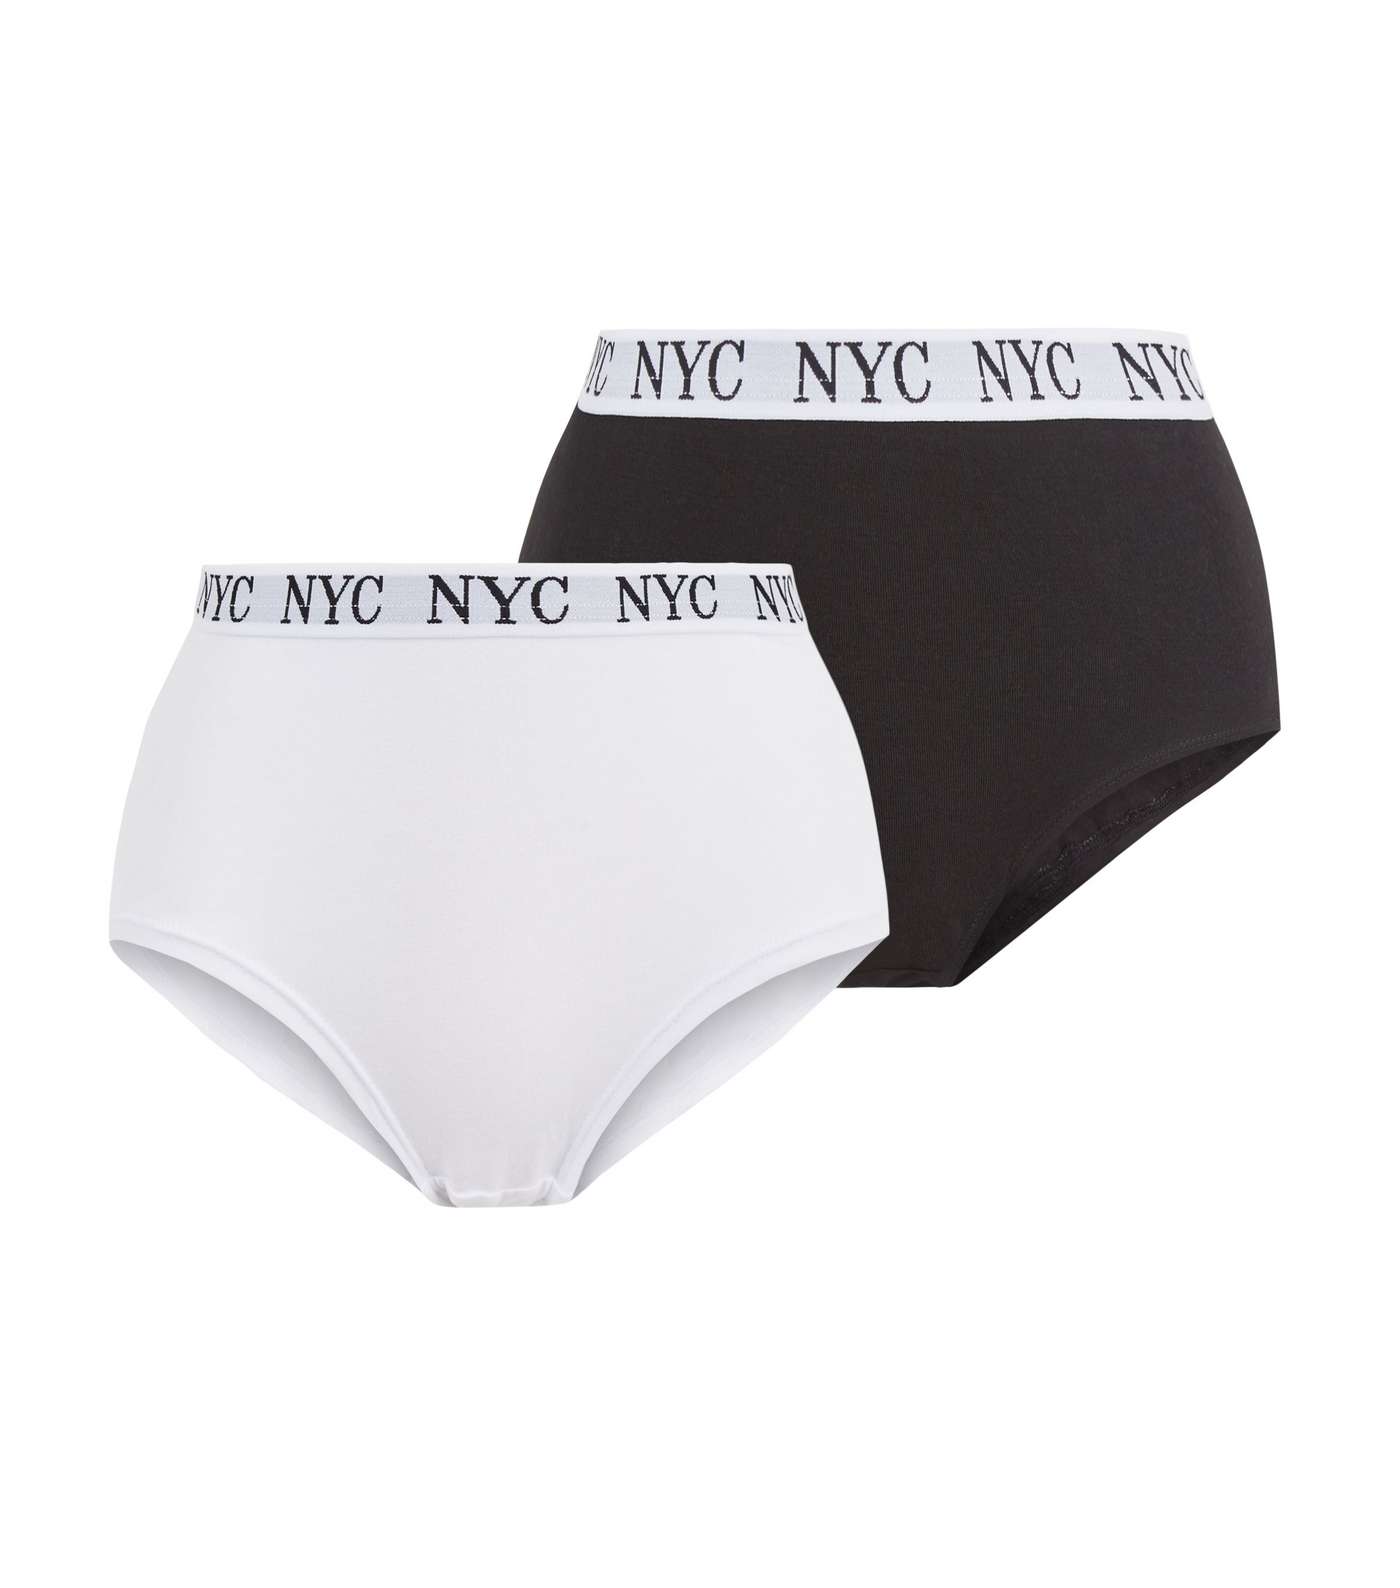 Girls 3 Pack Black and White NYC Short Briefs